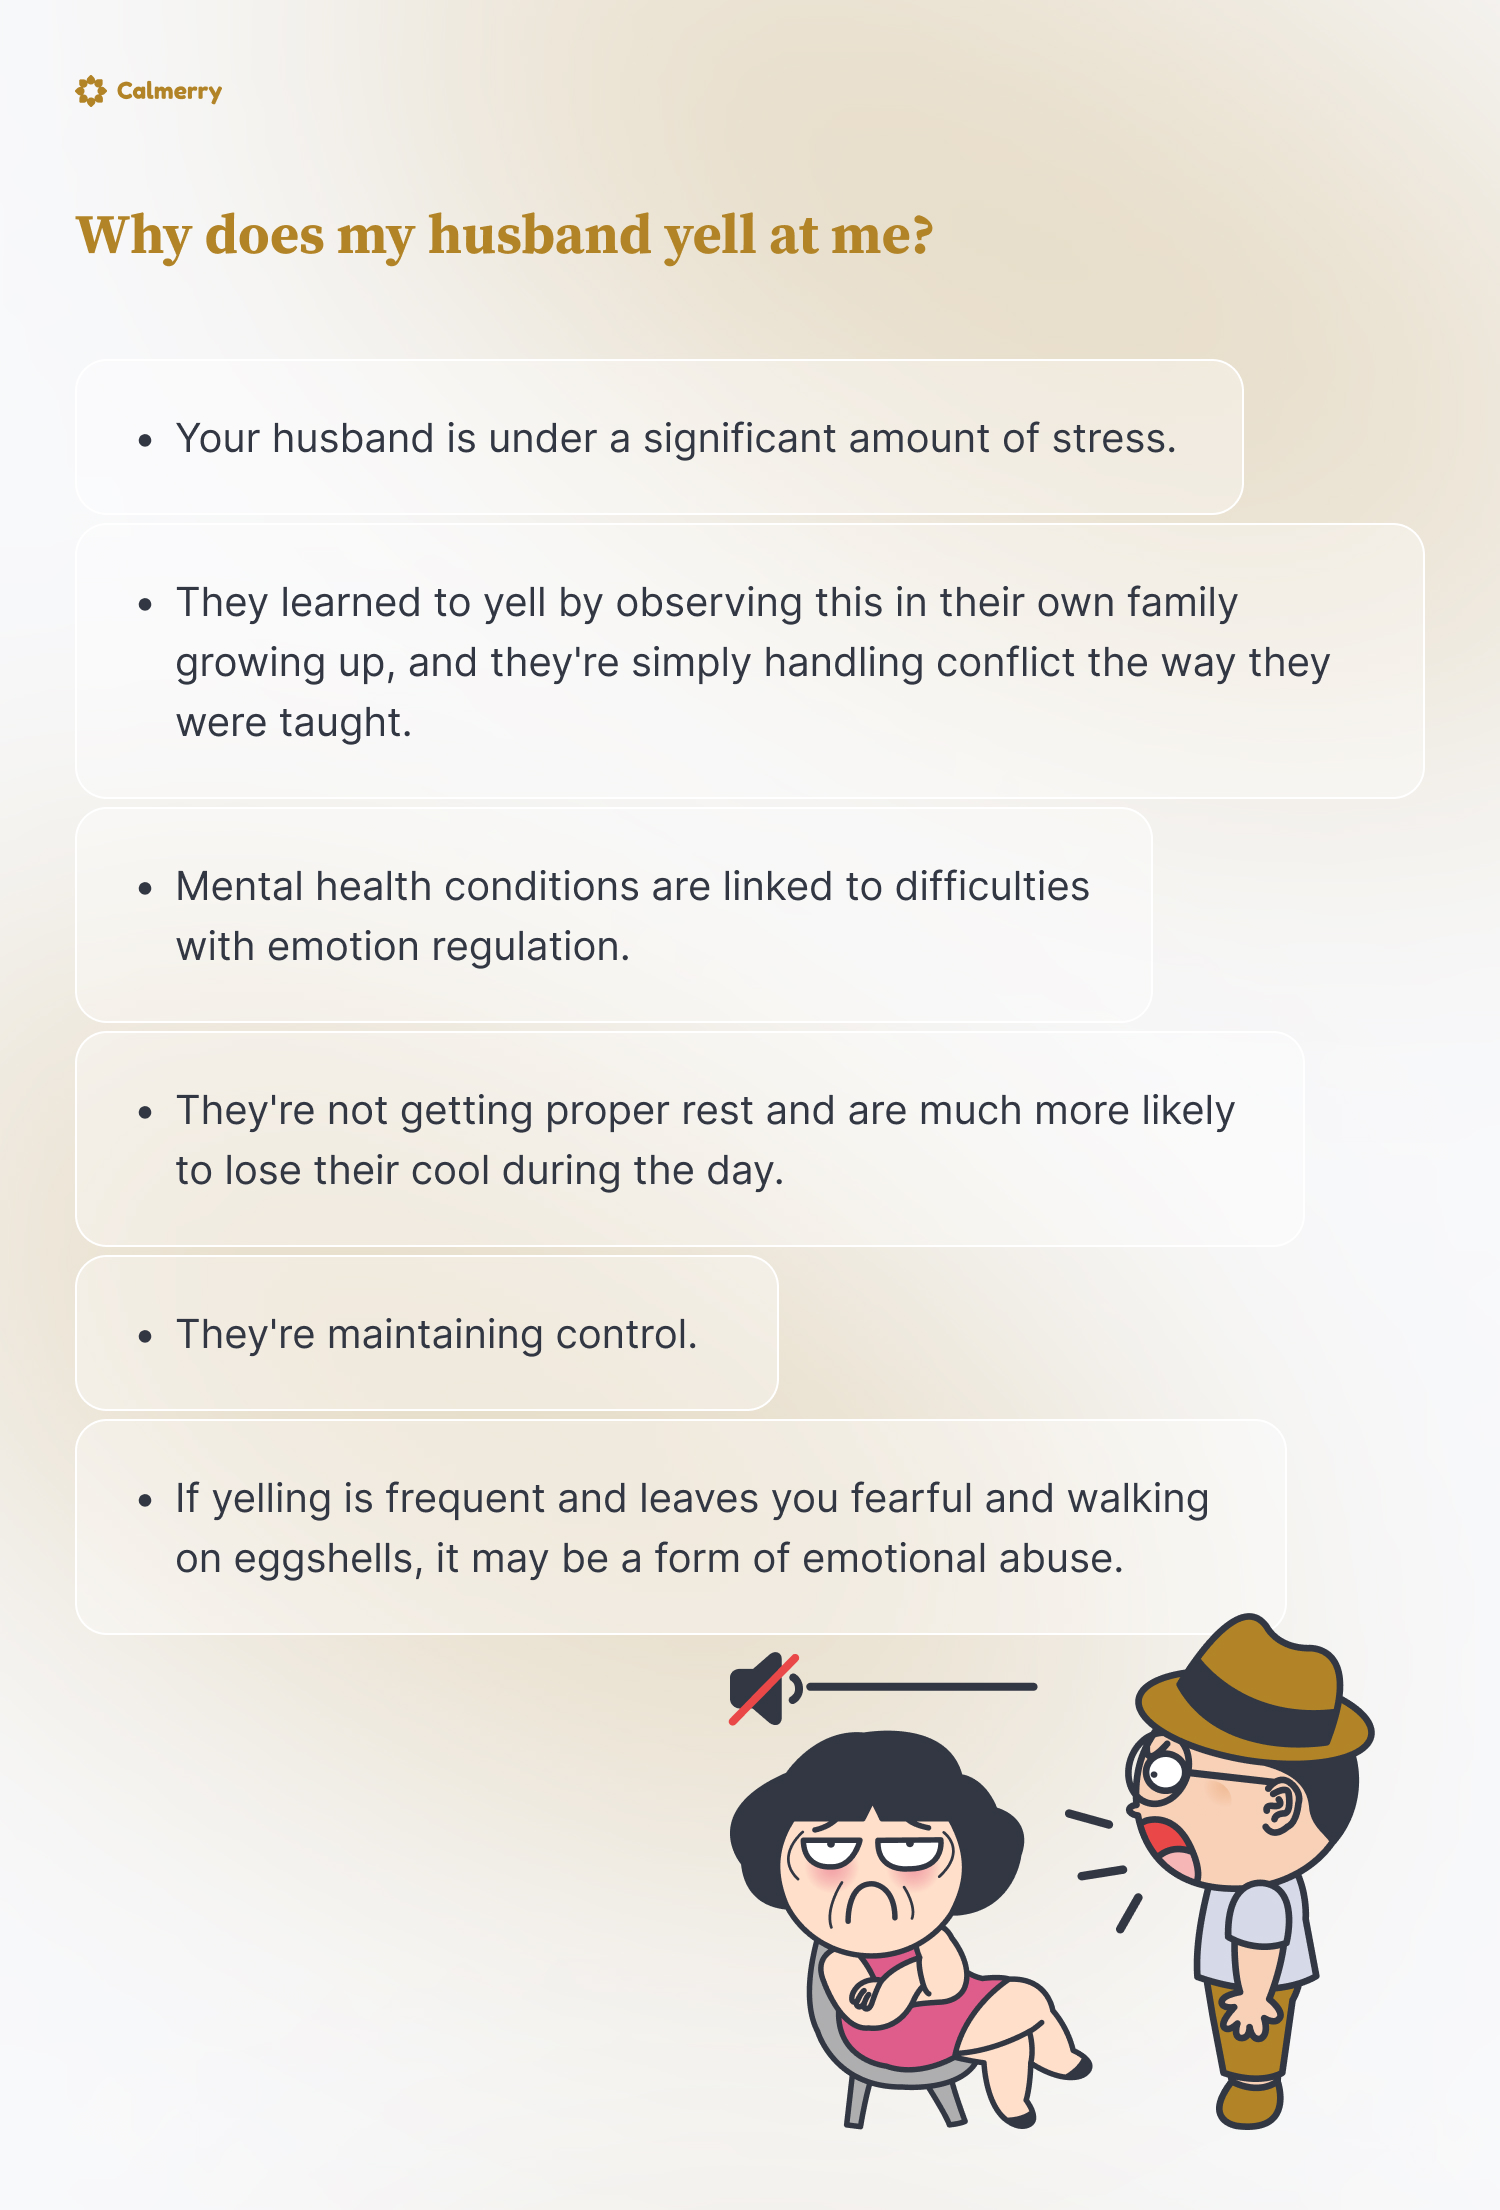 Why does my husband yell at me?
Your husband is under a significant amount of stress.
They learned to yell by observing this in their own family growing up, and they're simply handling conflict the way they were taught. 
Mental health conditions are linked to difficulties with emotion regulation.
They're not getting proper rest and are much more likely to lose their cool during the day. 
They're maintaining control.
if yelling is frequent and leaves you fearful and walking on eggshells, it may be a form of emotional abuse.
